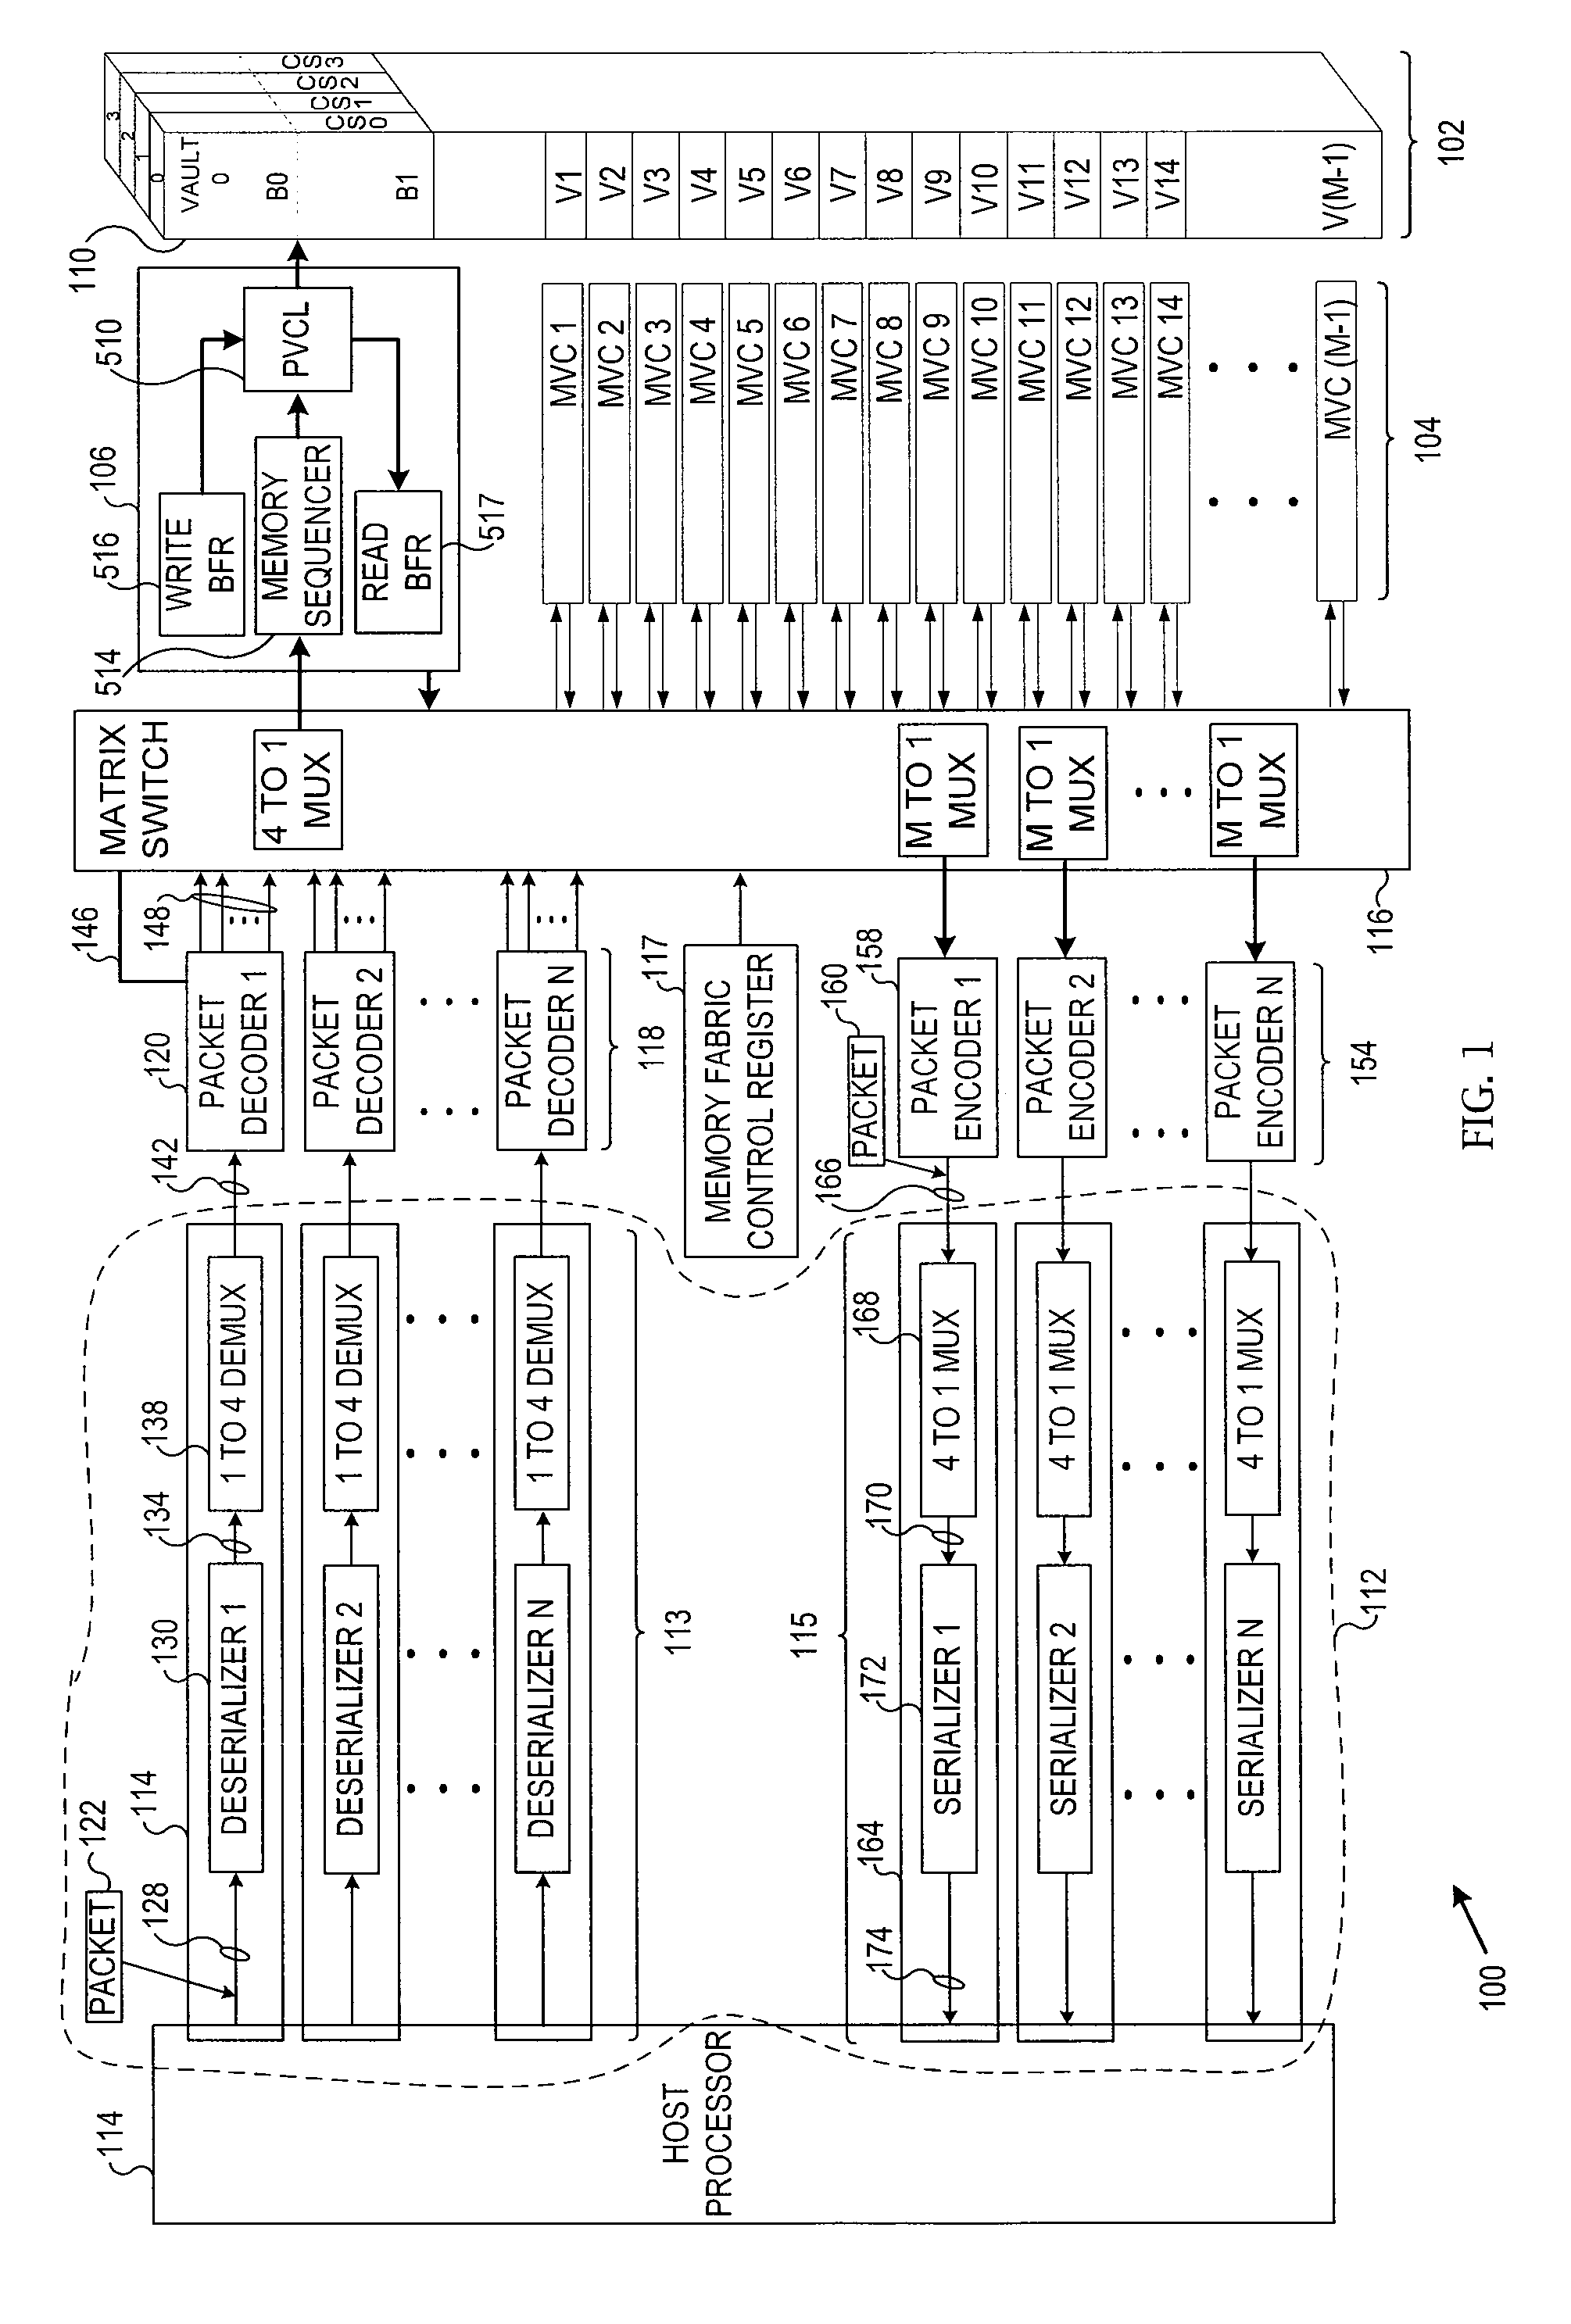 Multi-serial interface stacked-die memory architecture